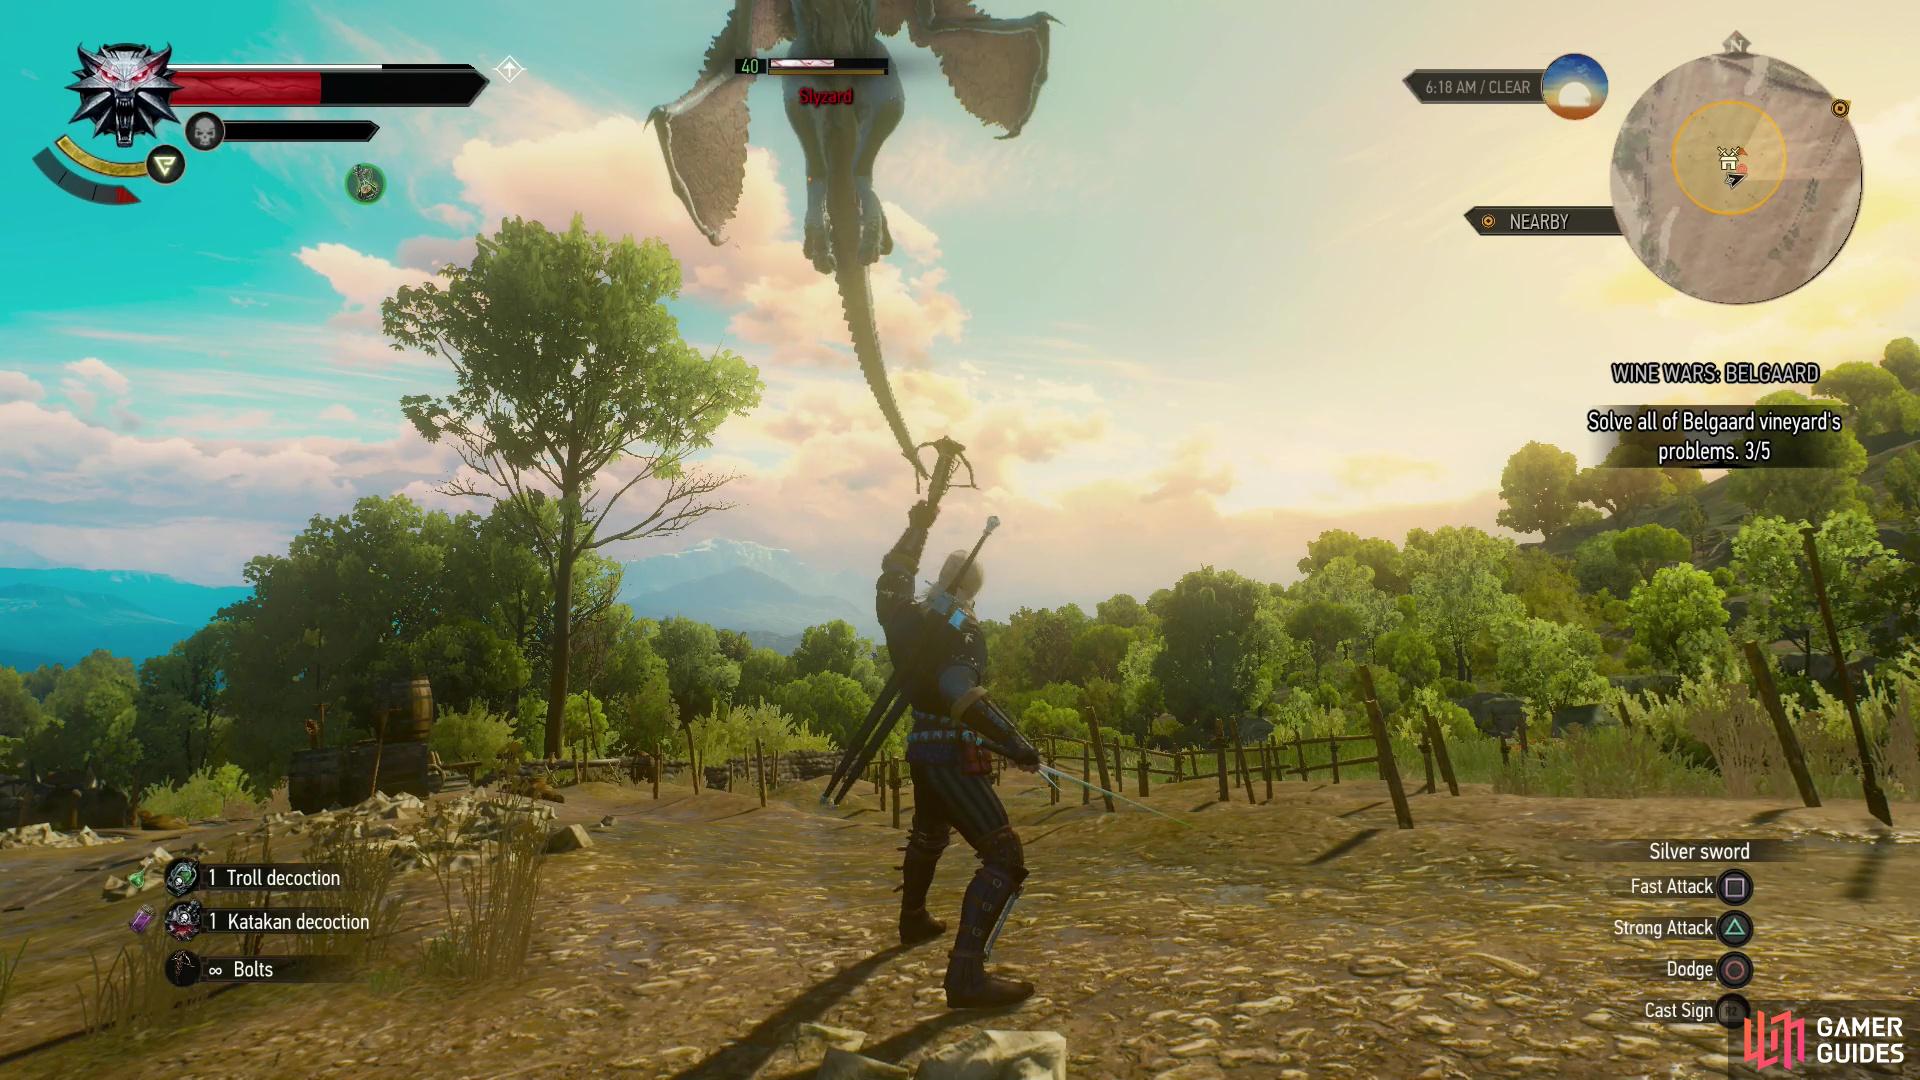 When flying, the Slyzard is vulnerable to crossbow attacks.